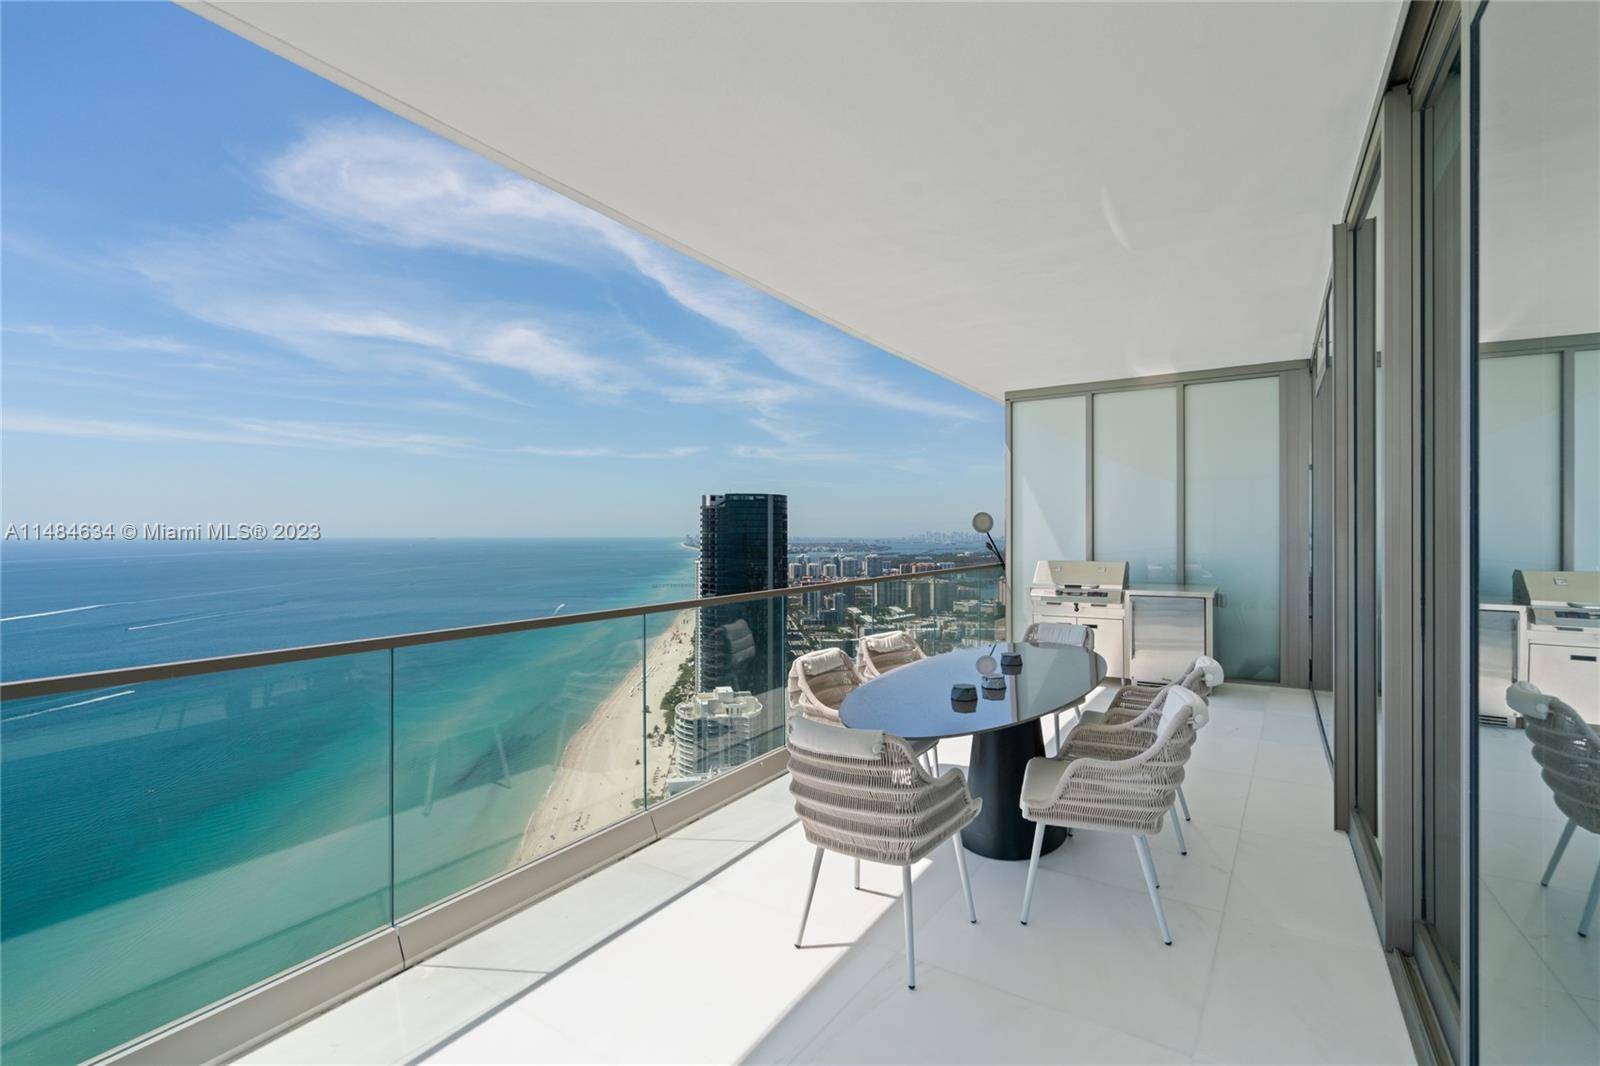 Live the world renowned Armani Casa brand with this spectacular 3 bedroom, 5.